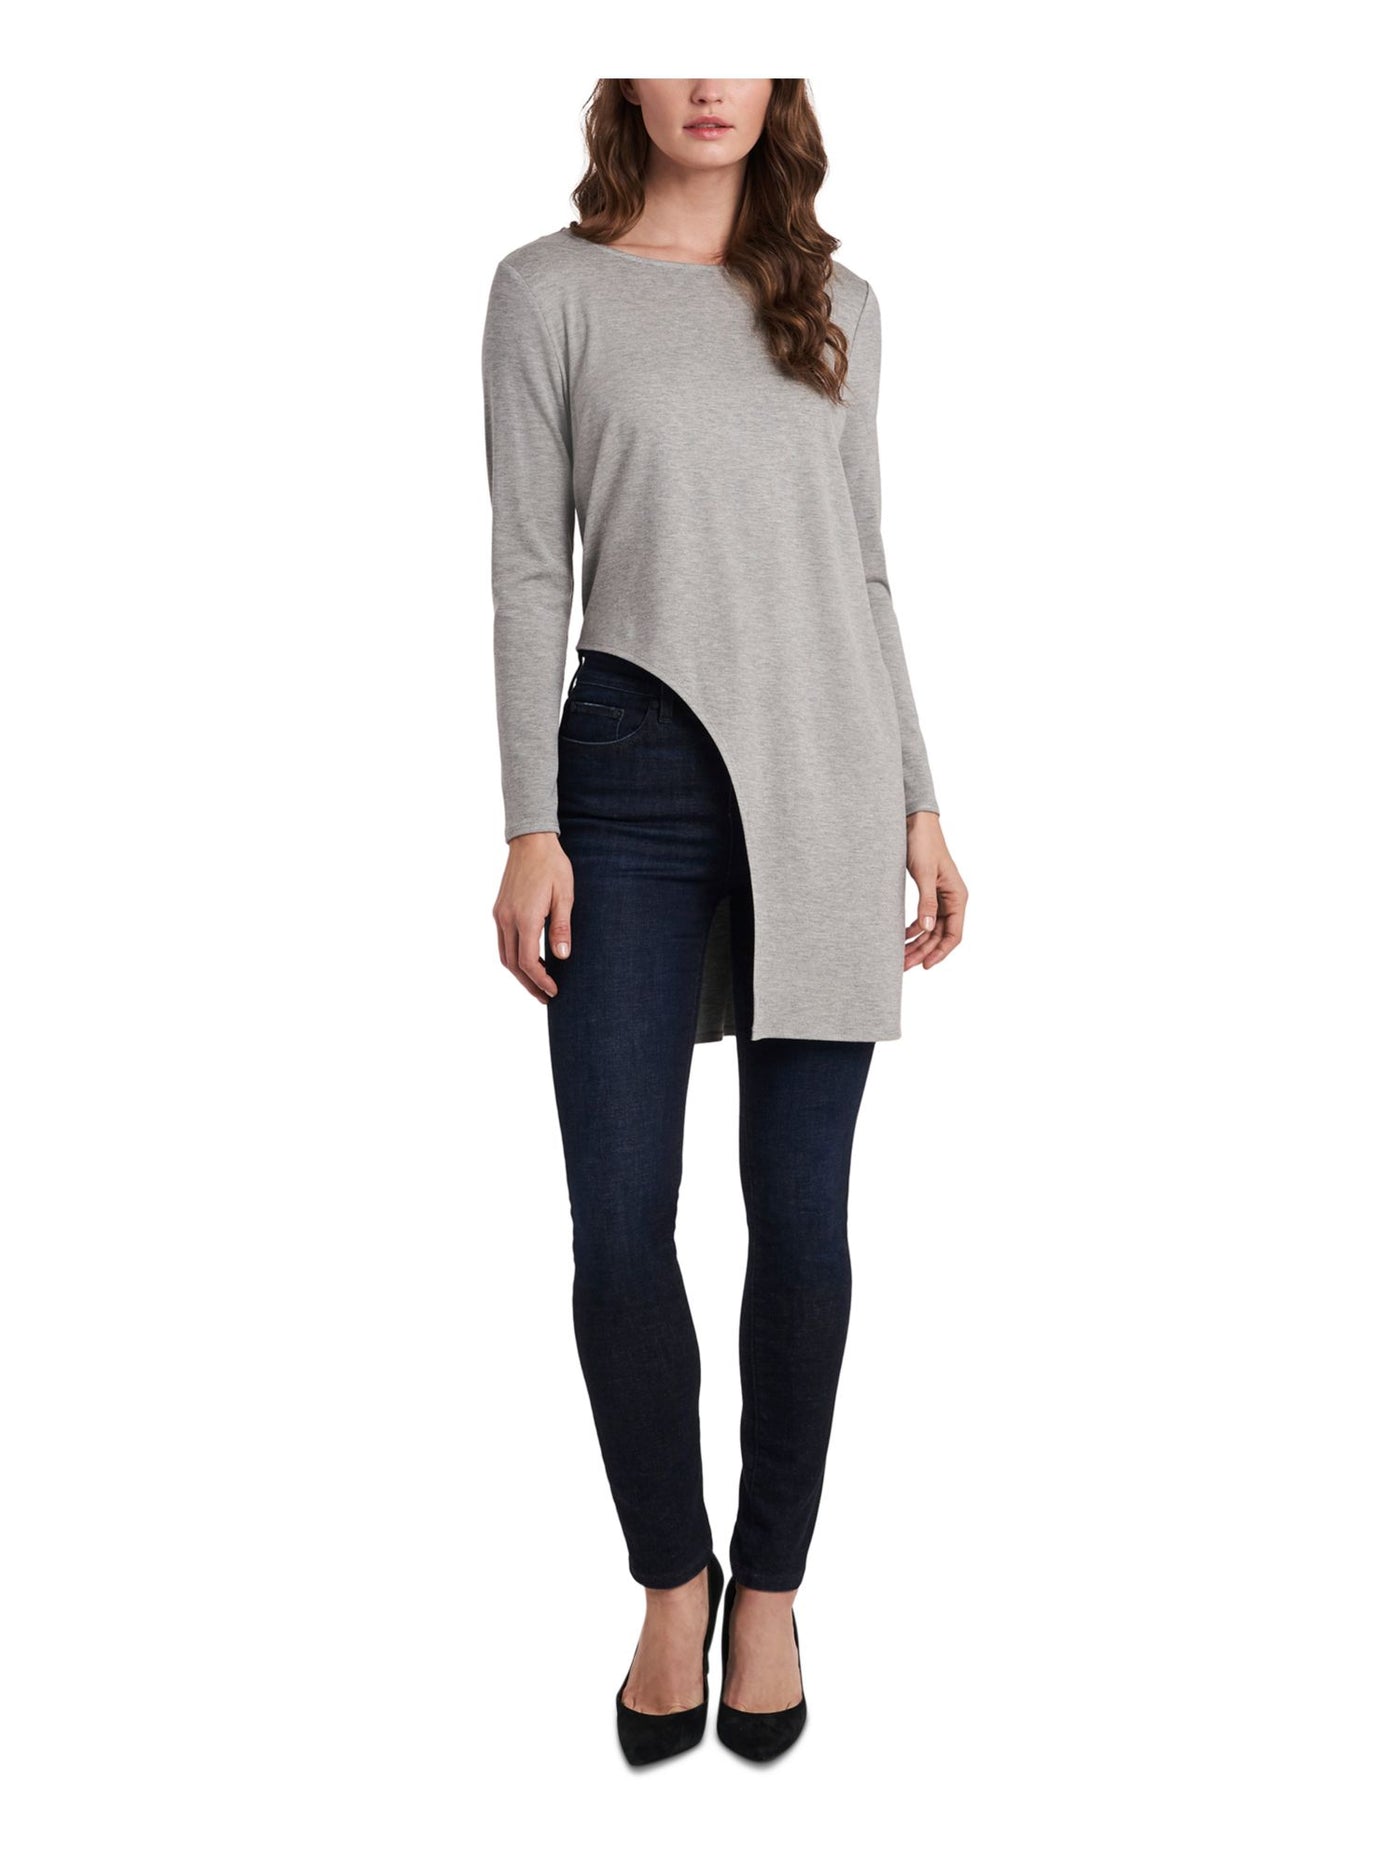 VINCE CAMUTO Womens Gray Cut Out Darted Asymmetrical Heather Long Sleeve Round Neck Tunic Top M